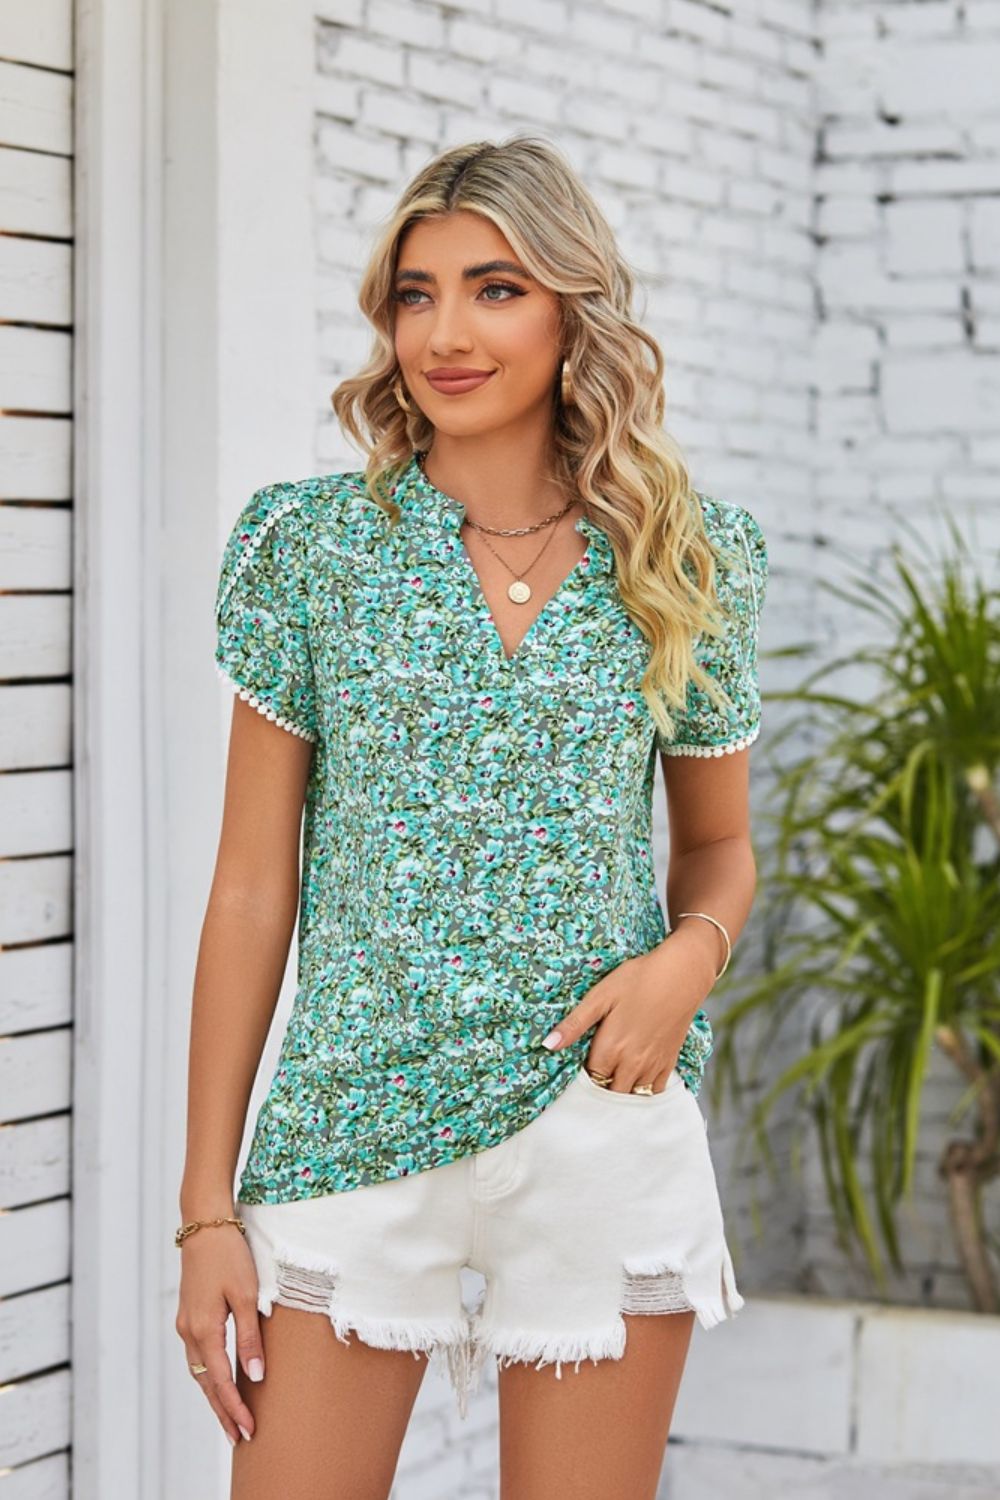 Cherished Stories Floral Short Sleeve Blouse - green floral v neck top paired with white denim shorts #Firefly Lane Boutique1